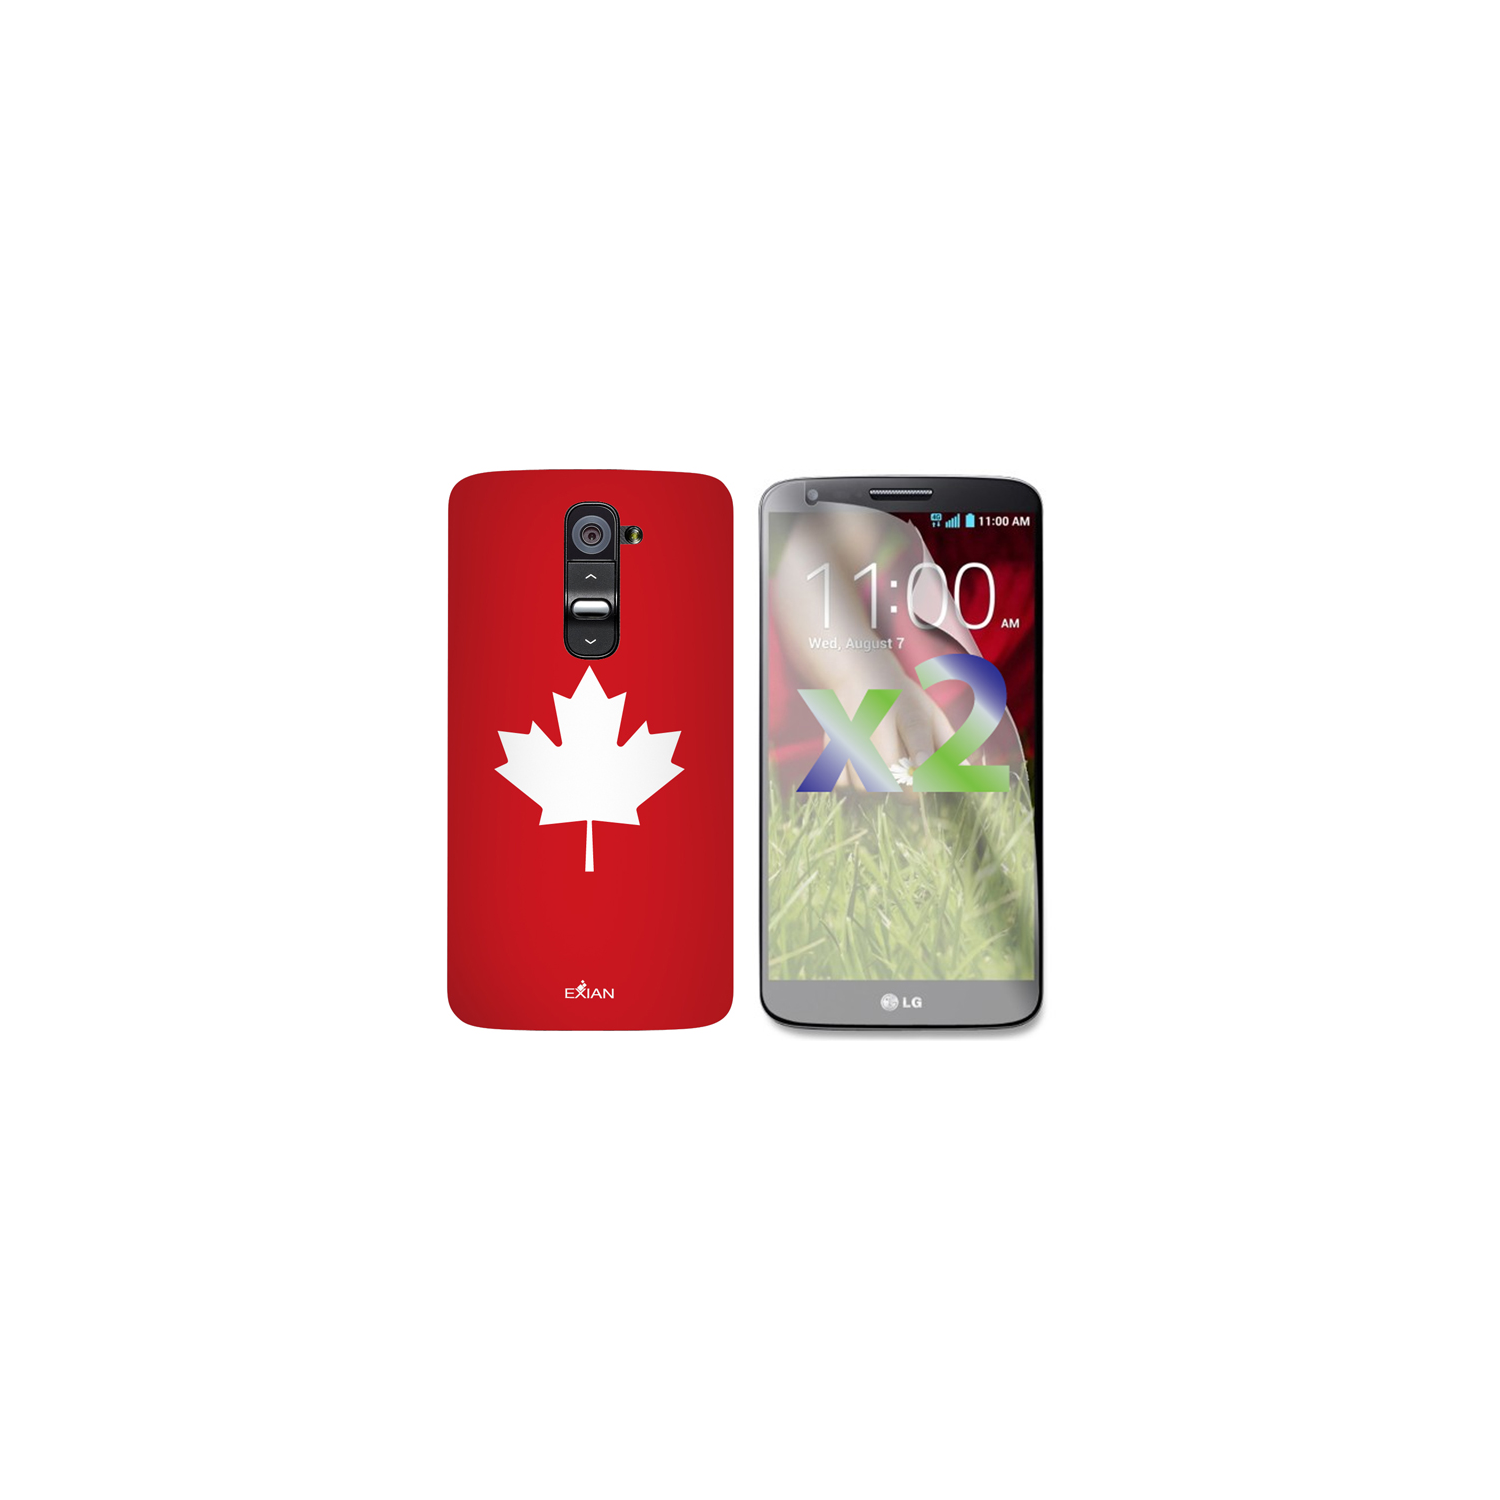 Exian LG G2 Screen Protectors X 2 and TPU Case Exian Design Maple Leaf Red